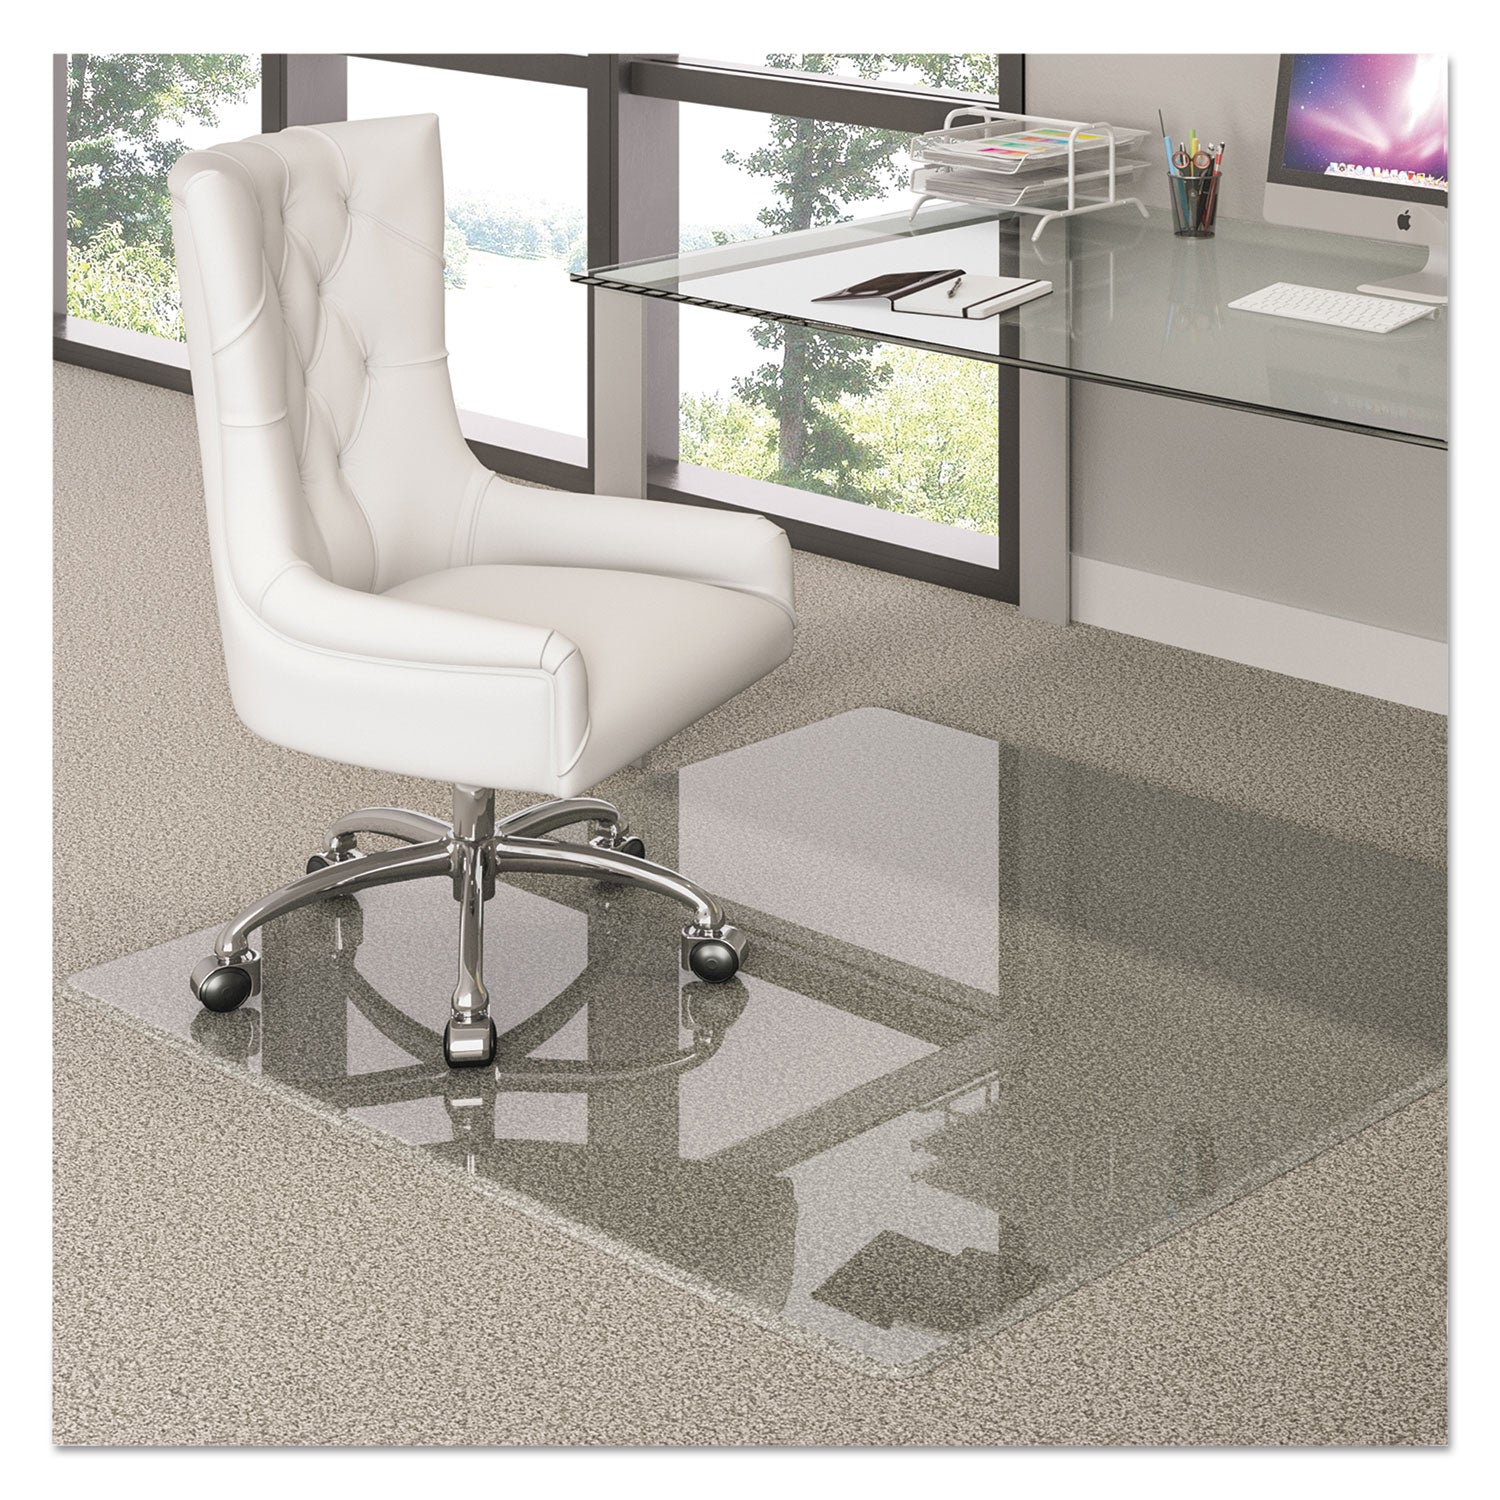 premium-glass-all-day-use-chair-mat--all-floor-types-48-x-60-rectangular-clear_defcmg70434860 - 1